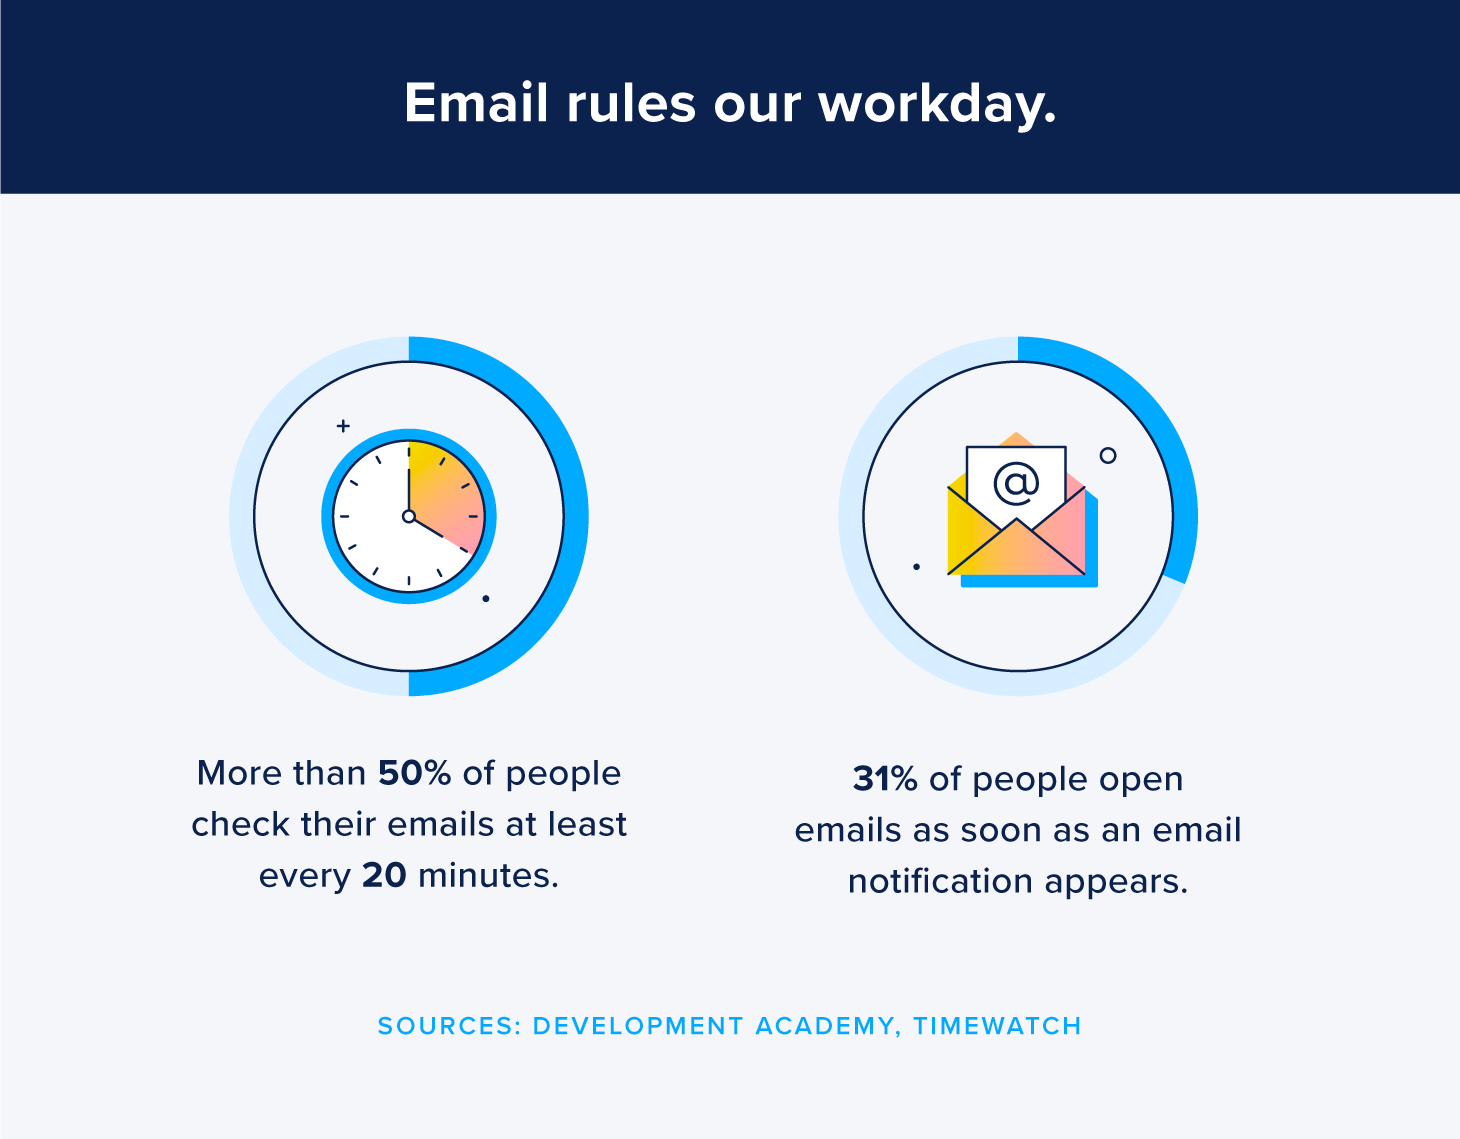 Illustration titled "Email rules our workday" with a clock showing 20 minutes and an opened email icon